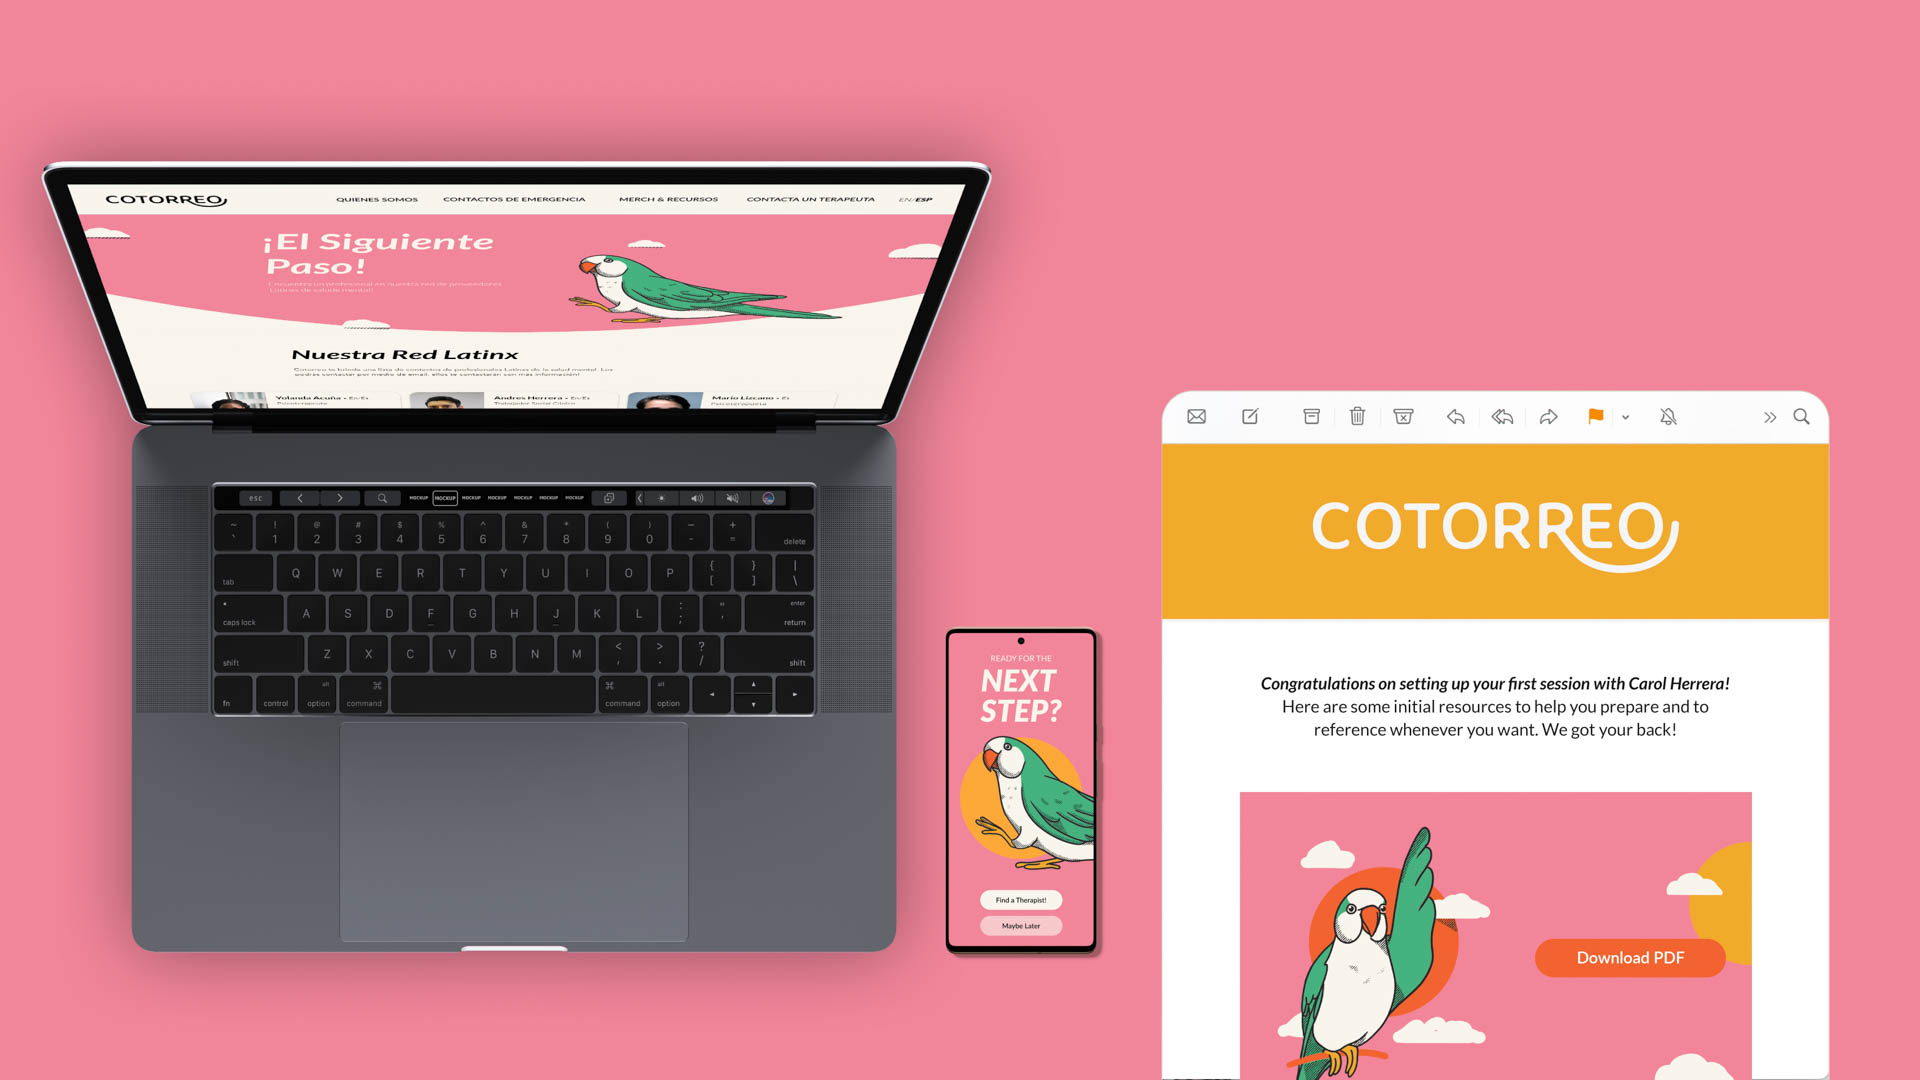 Cotorreo app branding on a laptop and iphone